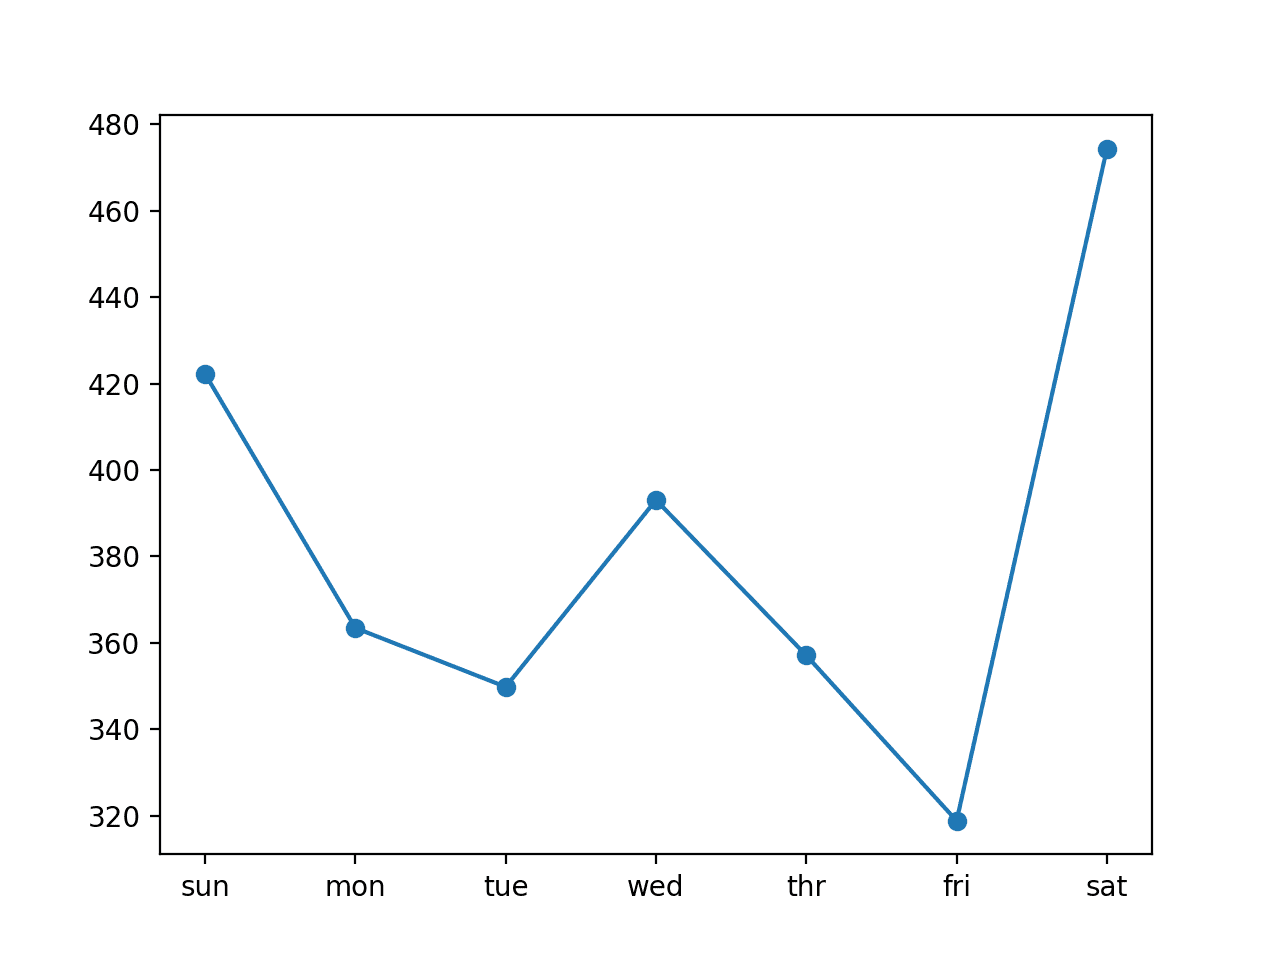 Line Plot of RMSE per Day for a Multichannel CNN with 14-day Inputs